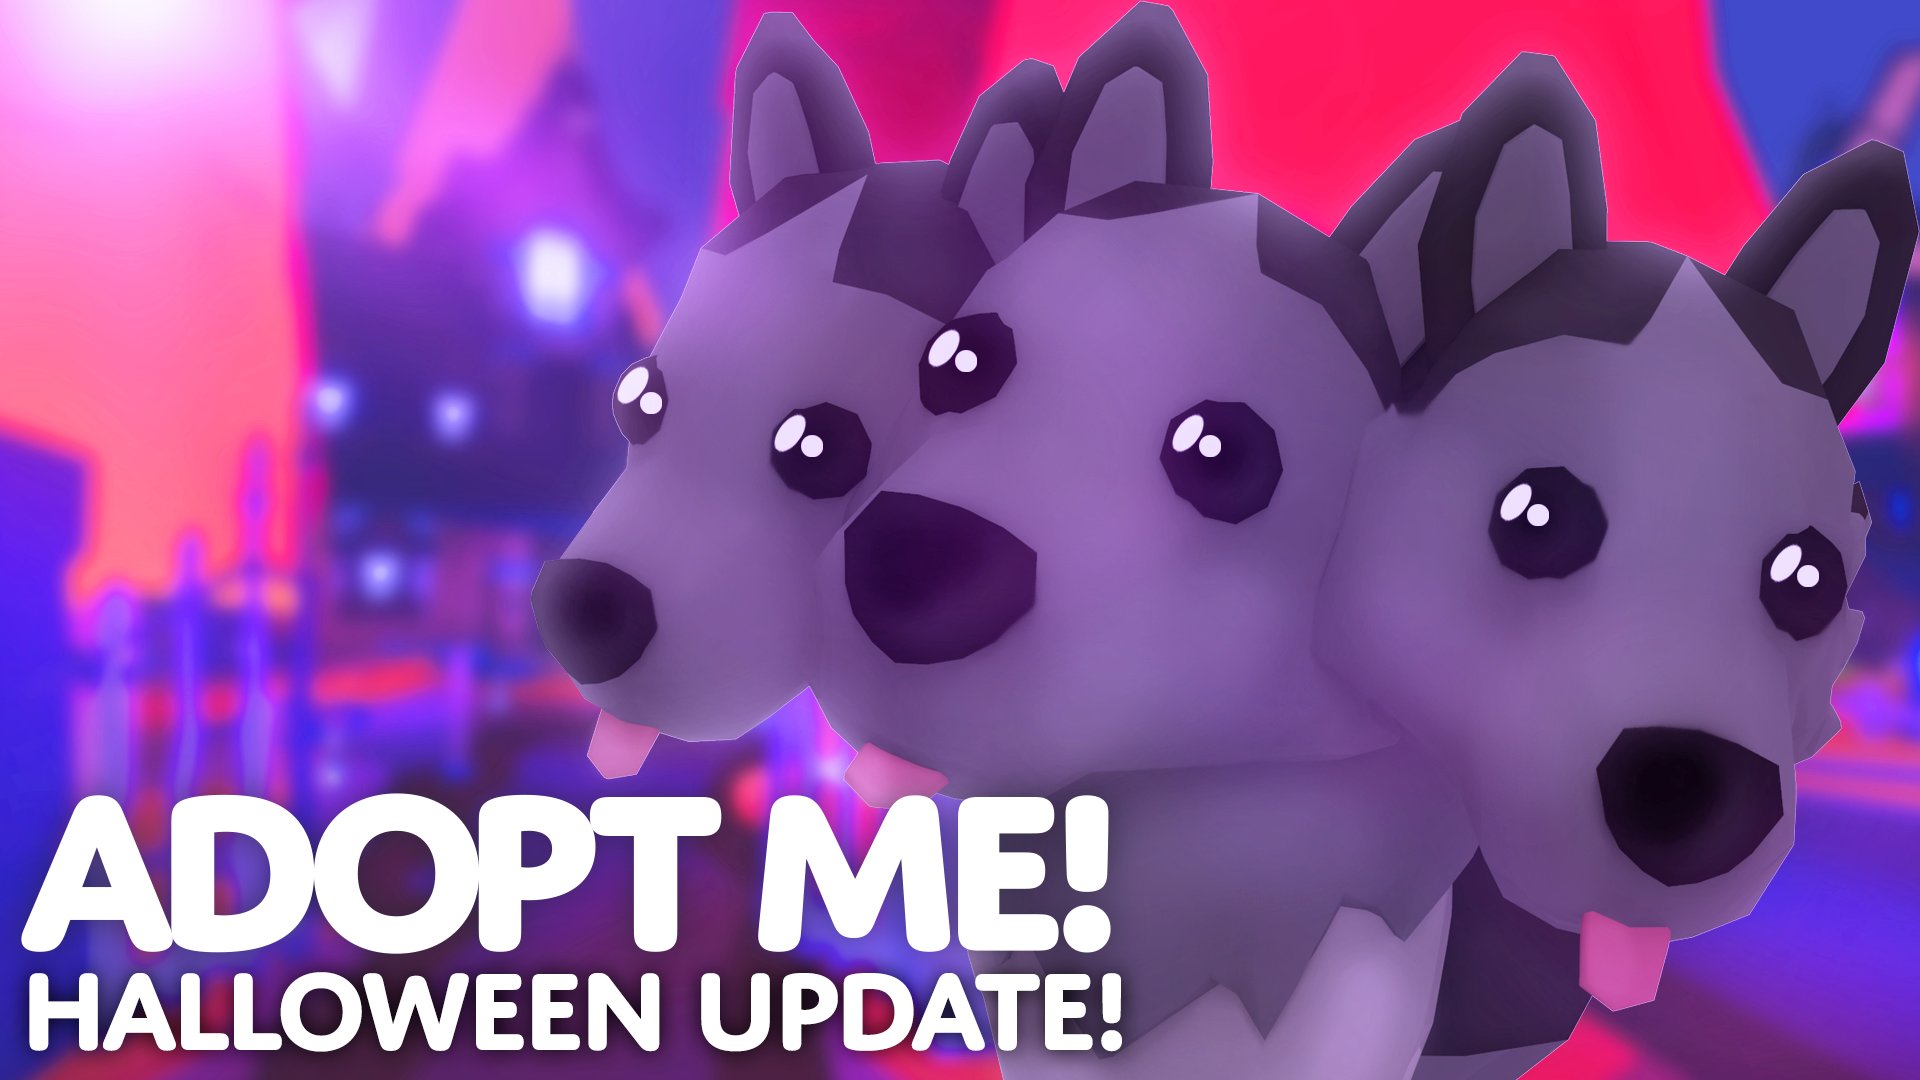 Adopt Me On Twitter Halloween Update Play 2 New Minigames And Earn Candy Free Candy In The Shop Every Day 6 New Pets Including Temporary Minigame Reward - cerberus roblox